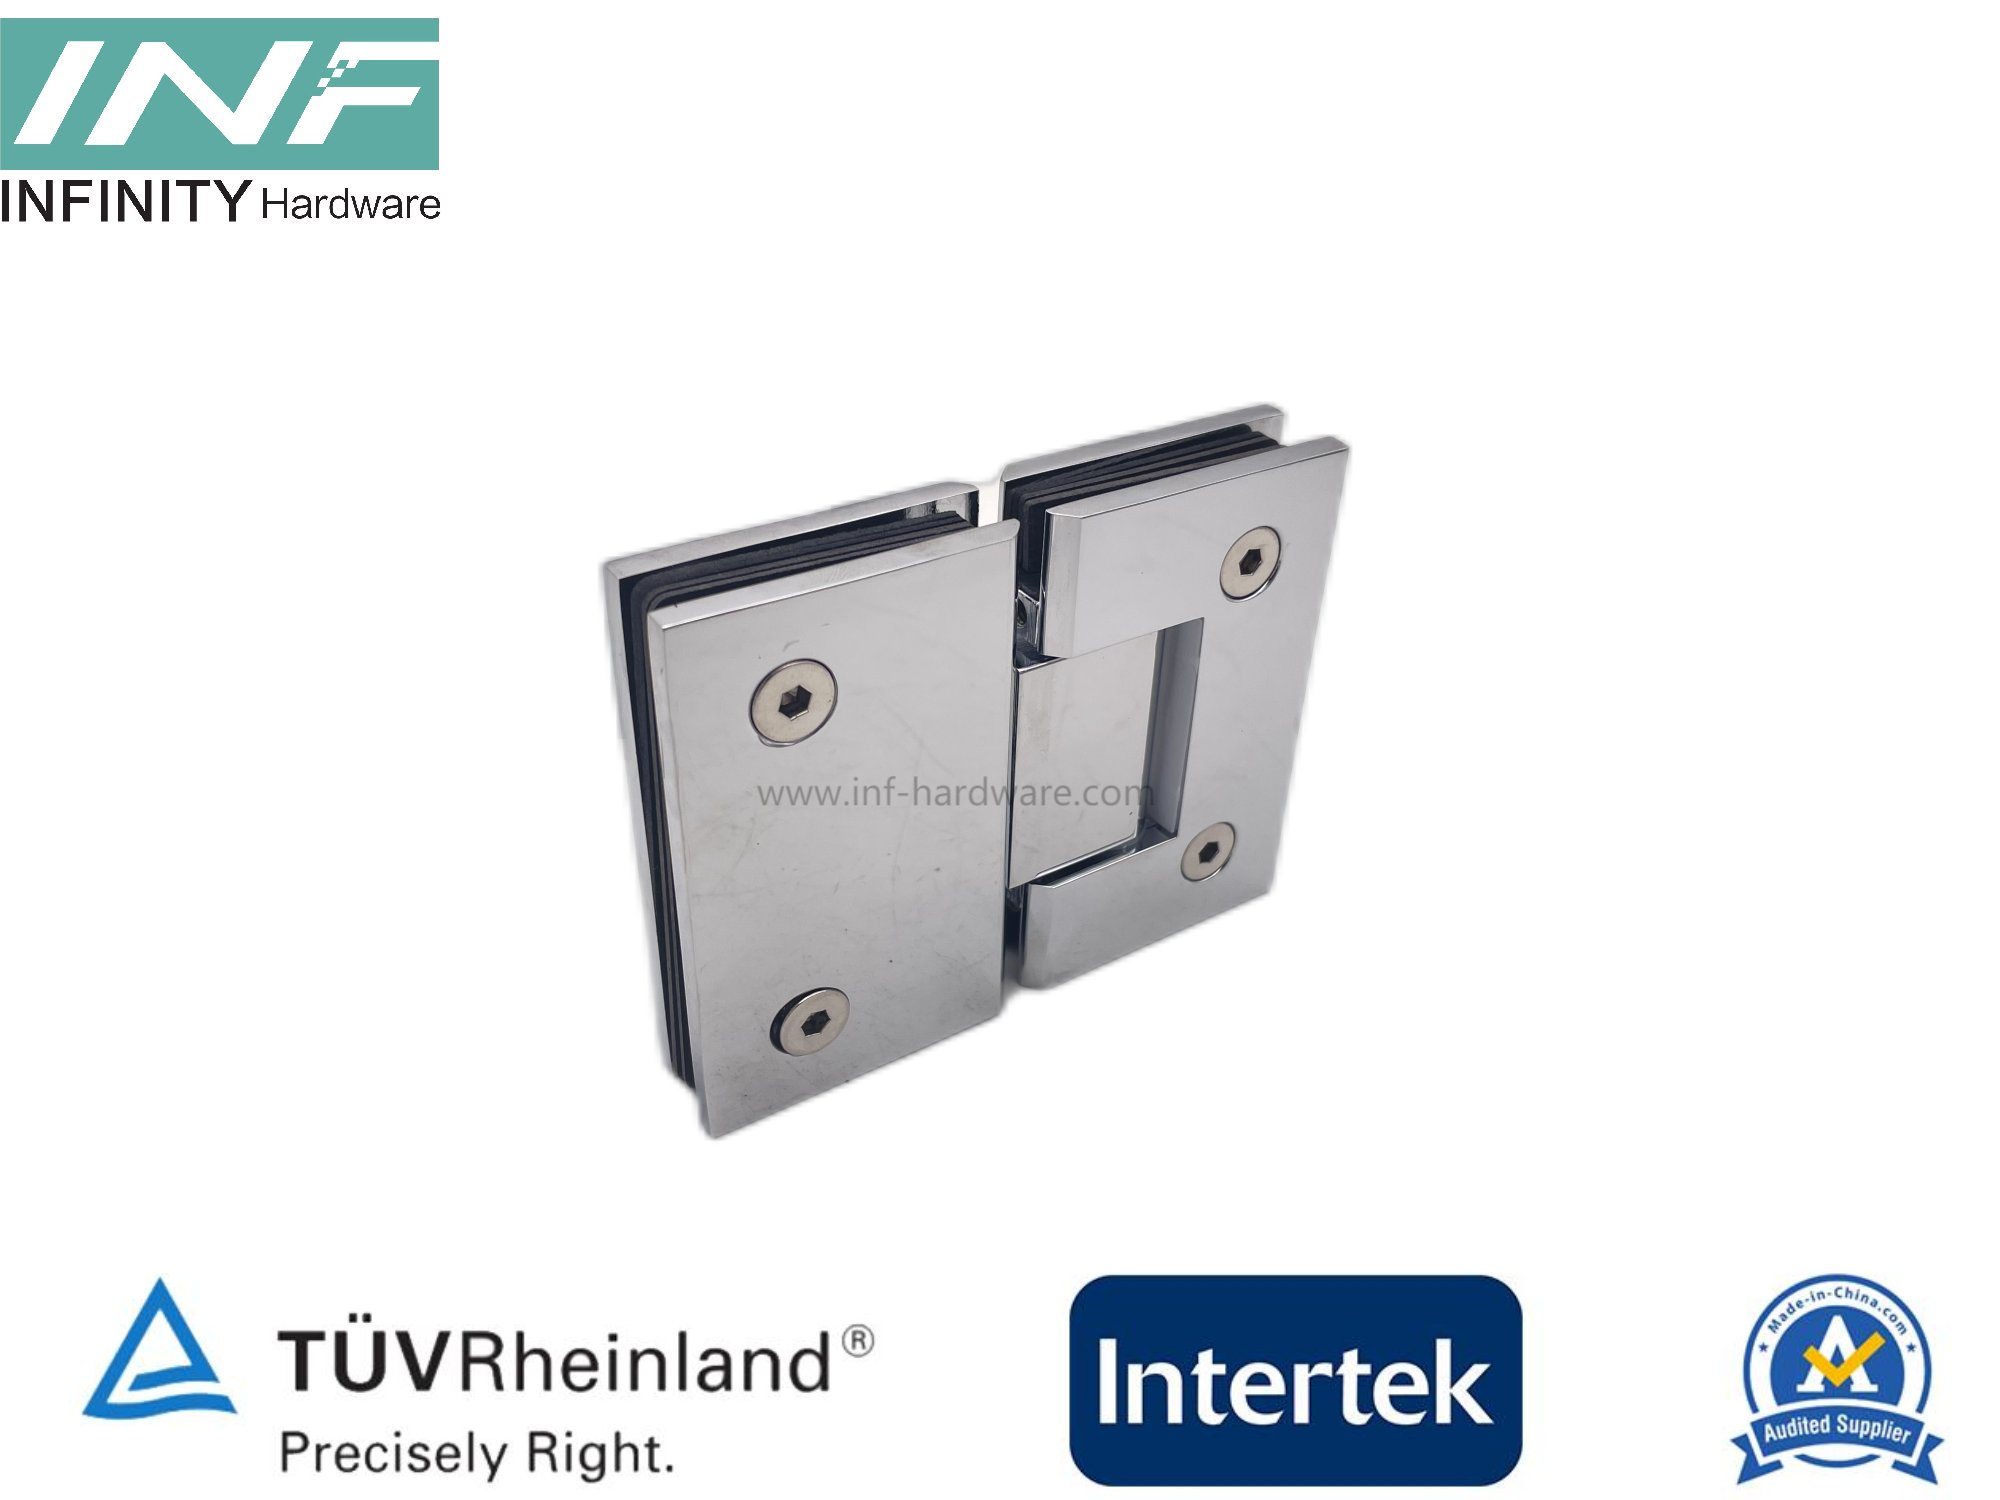 Glass to Glass Straight Corner 180° Glass Door Shower Hinge with 85° & 90° Pin Adjustable Function Chrome Finished